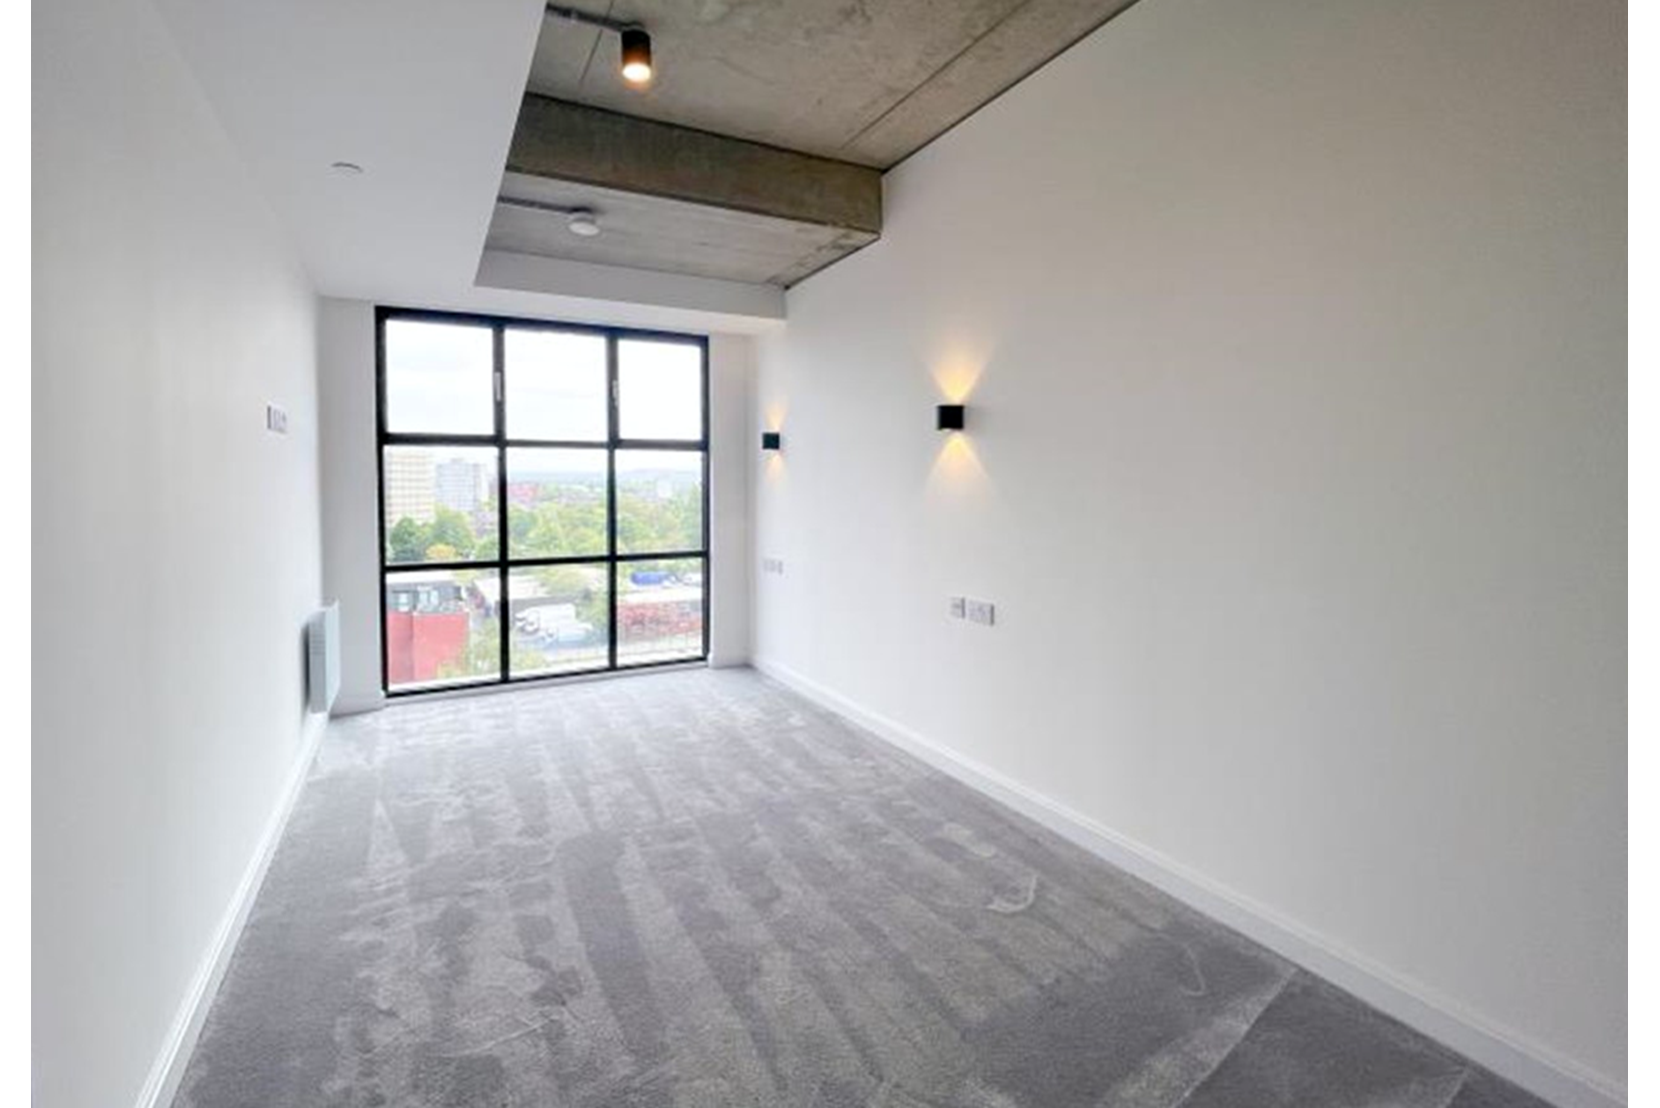 Apartments to Rent by Northern Group at One Silk Street, Manchester, M4, bedroom